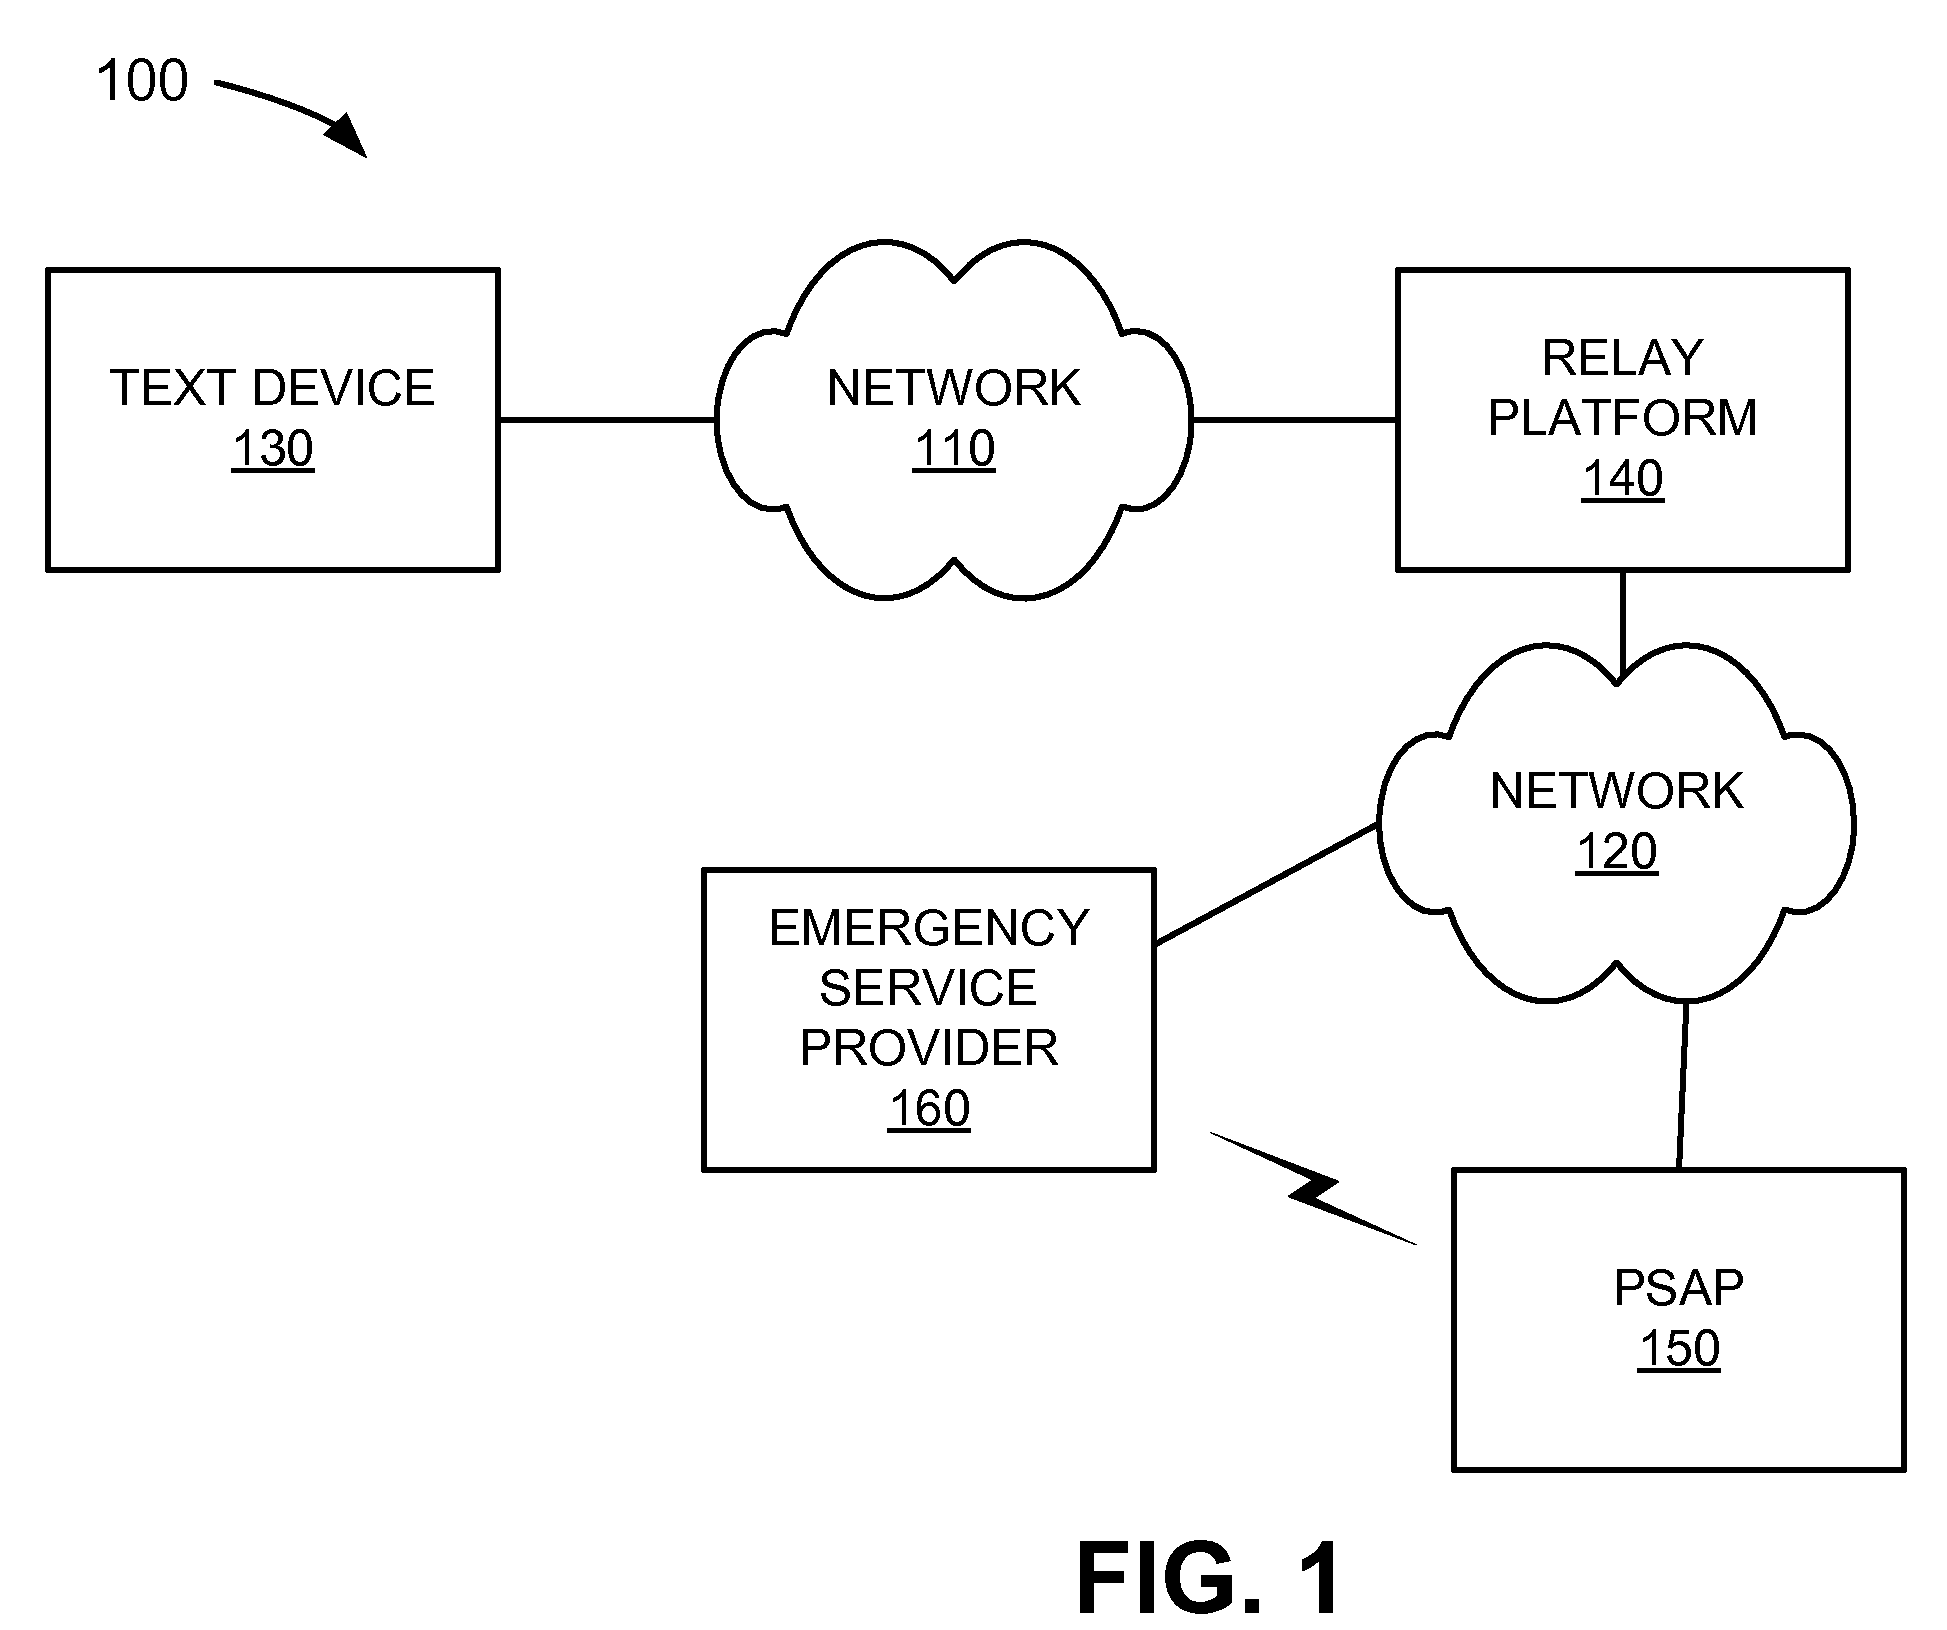 E911 location services for users of text device relay services